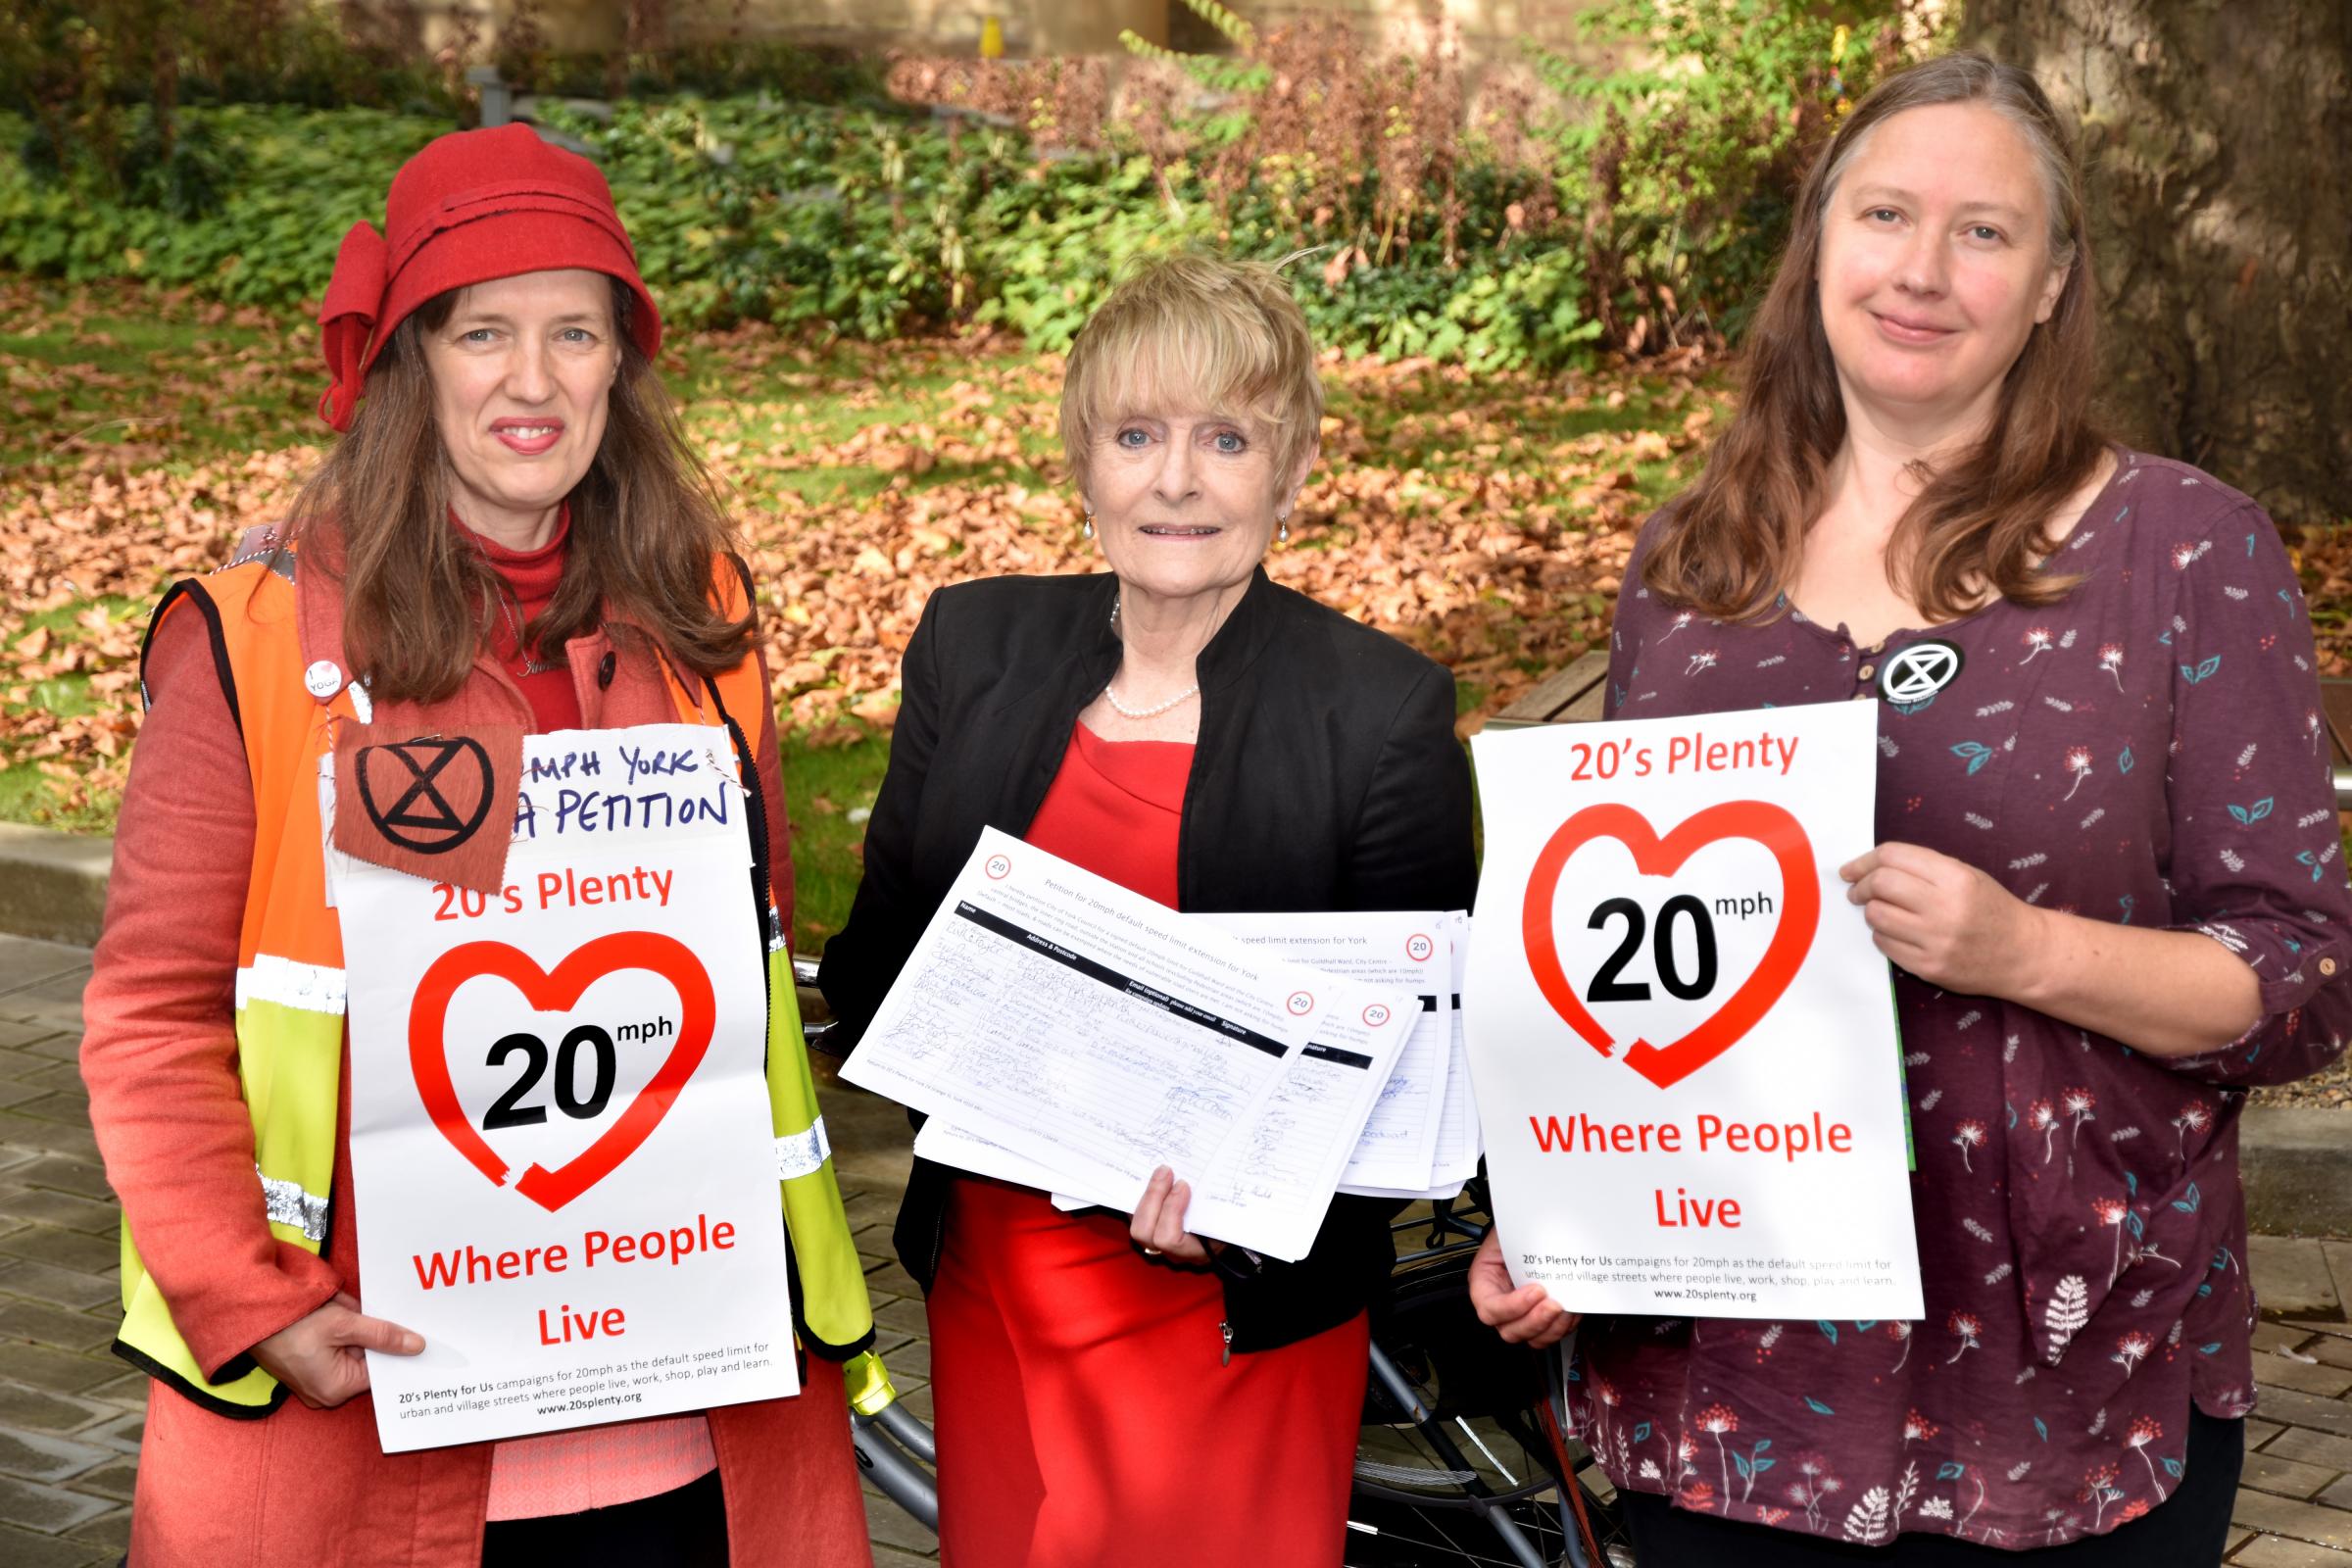 Campaigners call for York city centre 20mph speed limits